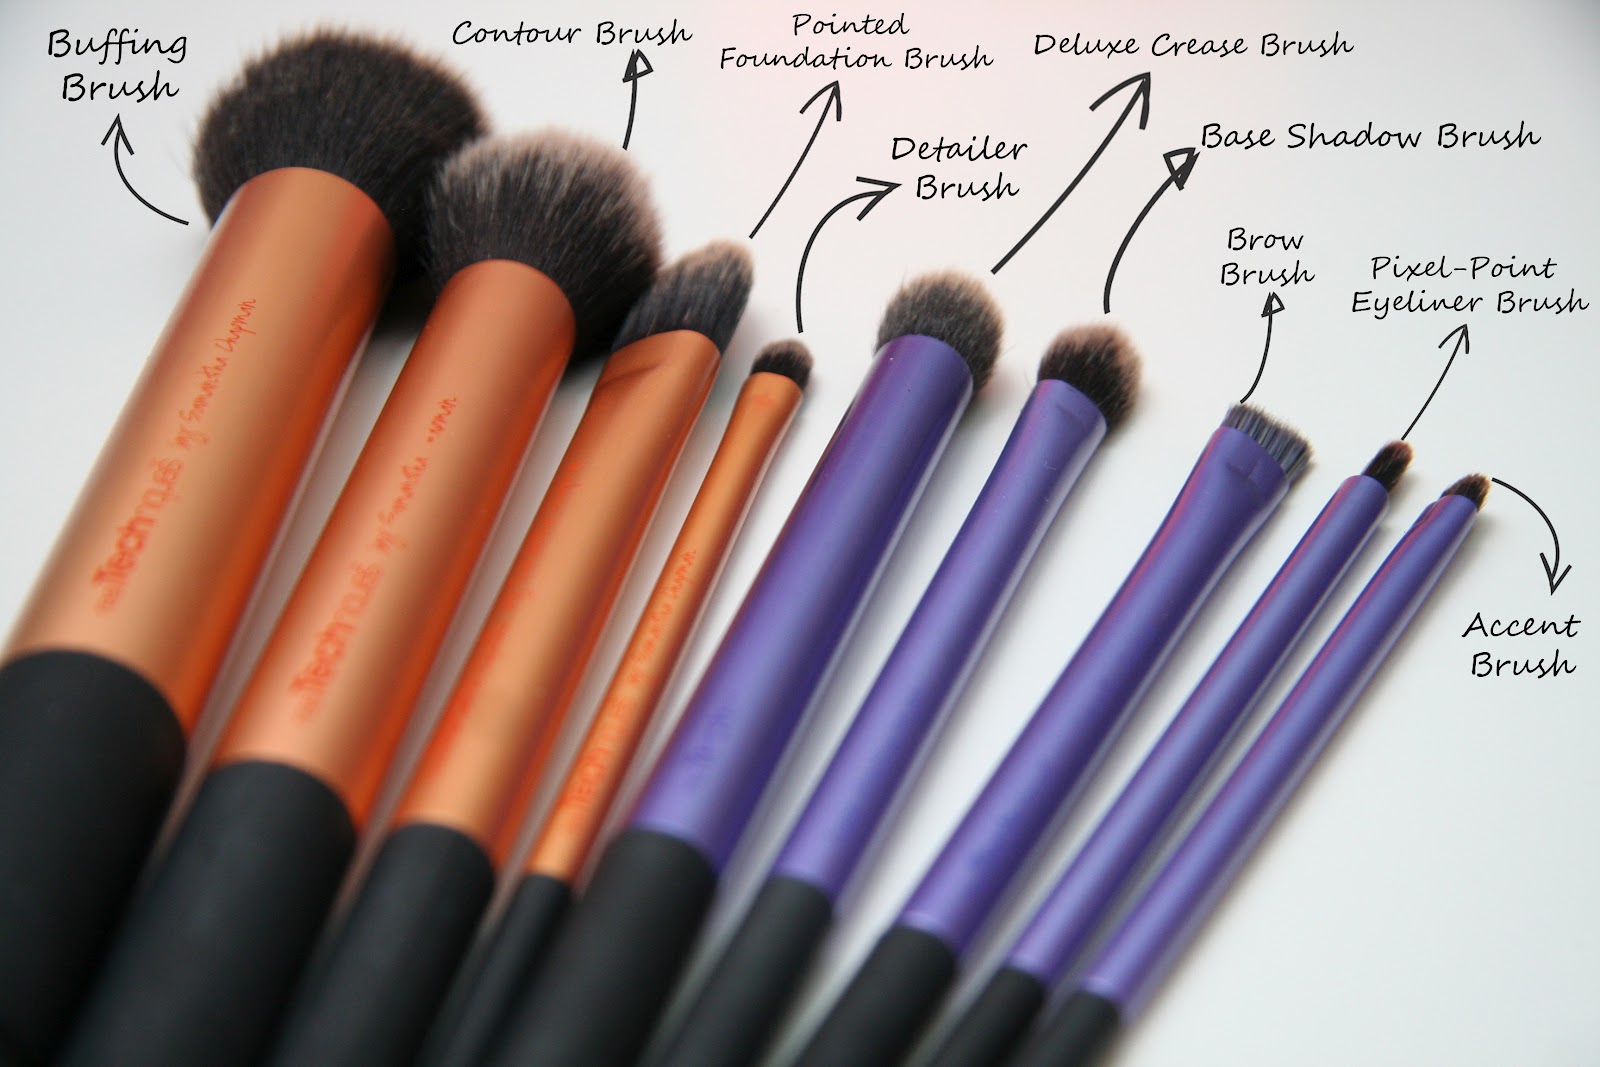 10. Clean Up Brushes - wide 7